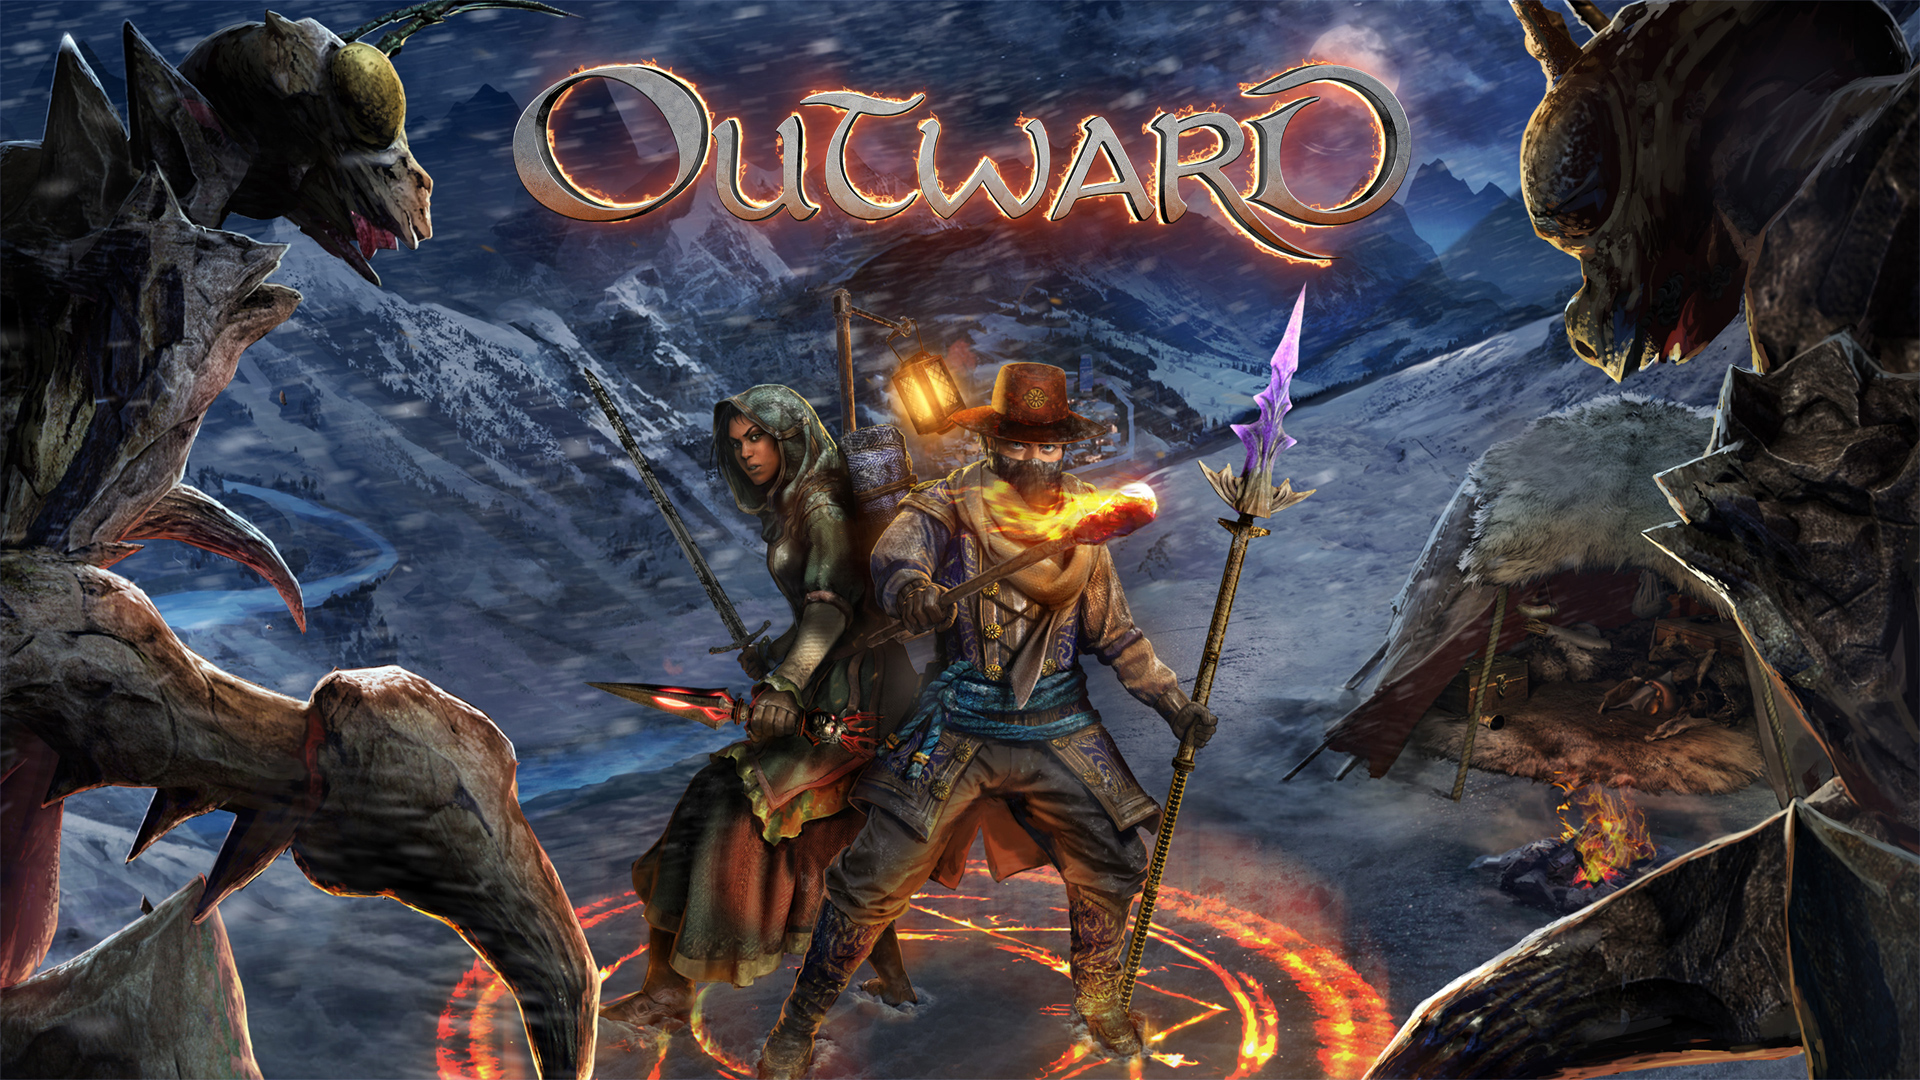 Free download Games heroes Wallpaper from Outward gamepressurecom [1920x1080] for your Desktop, Mobile & Tablet. Explore Outward Video Game Wallpaper. Outward Video Game Wallpaper